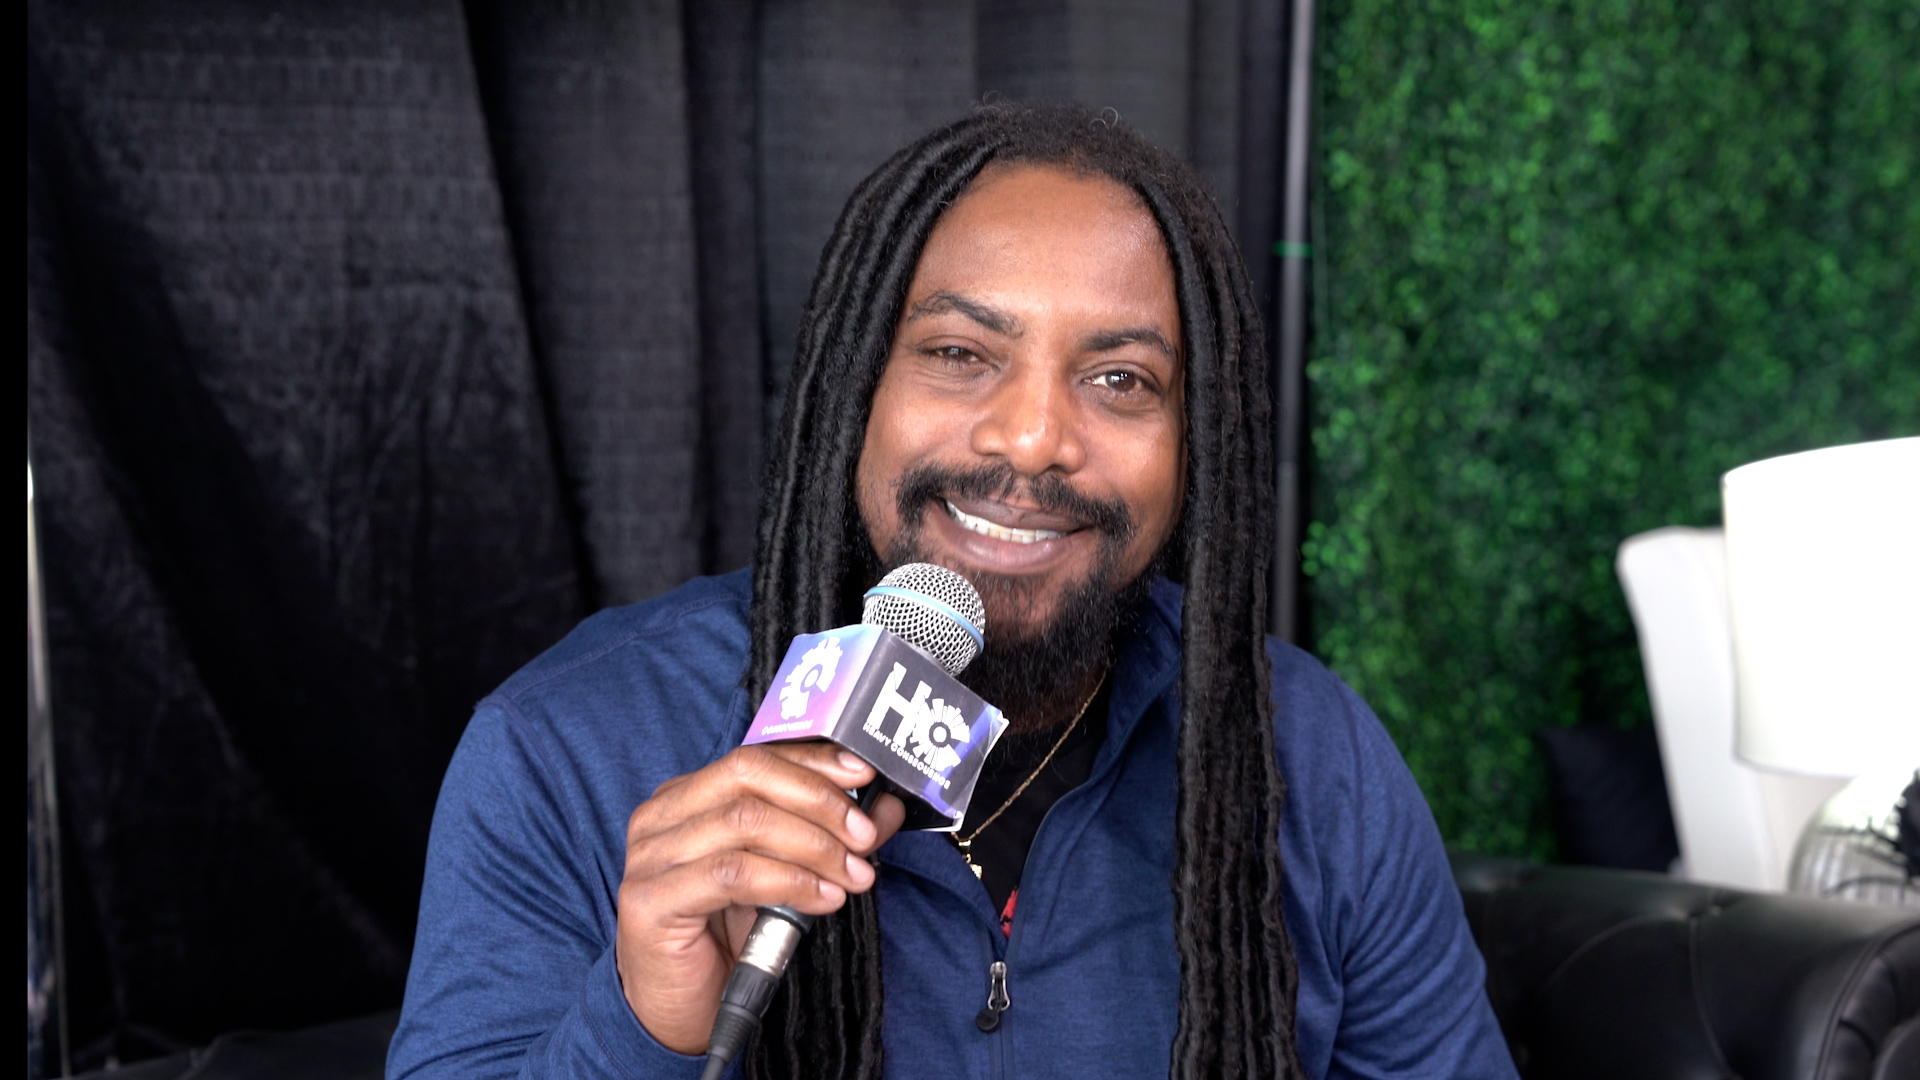 Sevendust's Lajon Witherspoon Talks Upcoming Album, Band Longevity, and More